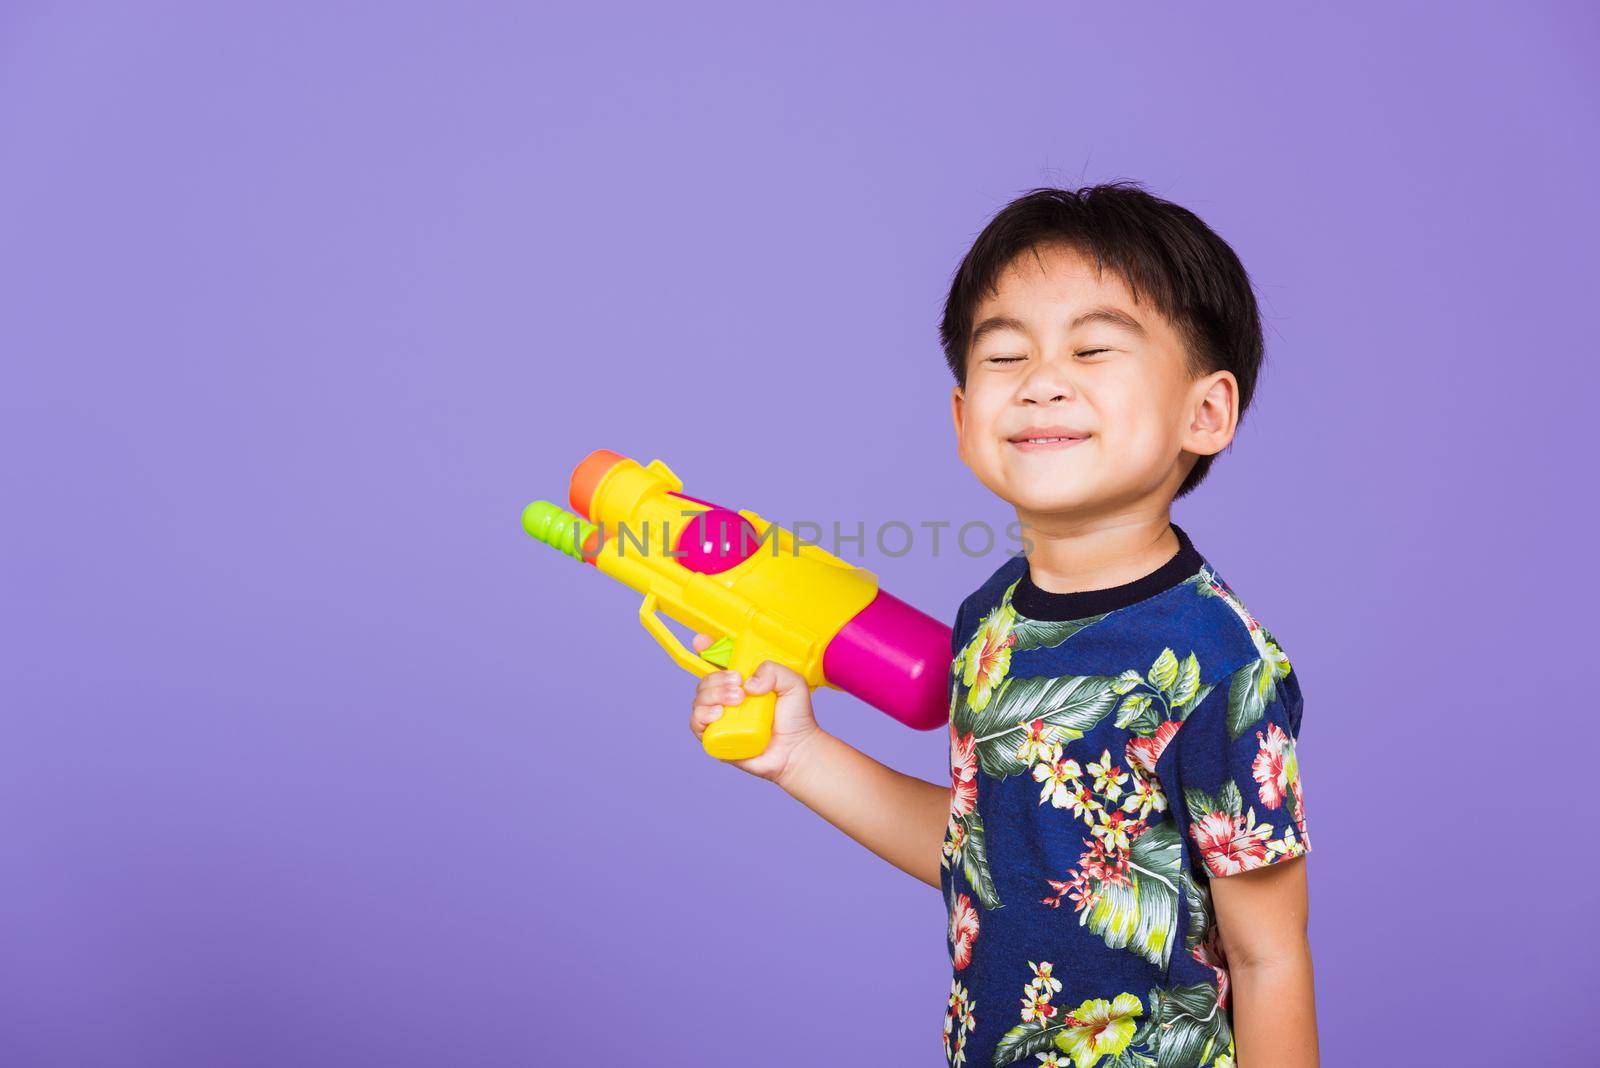 Thai kid funny hold toy water pistol and smiling by Sorapop